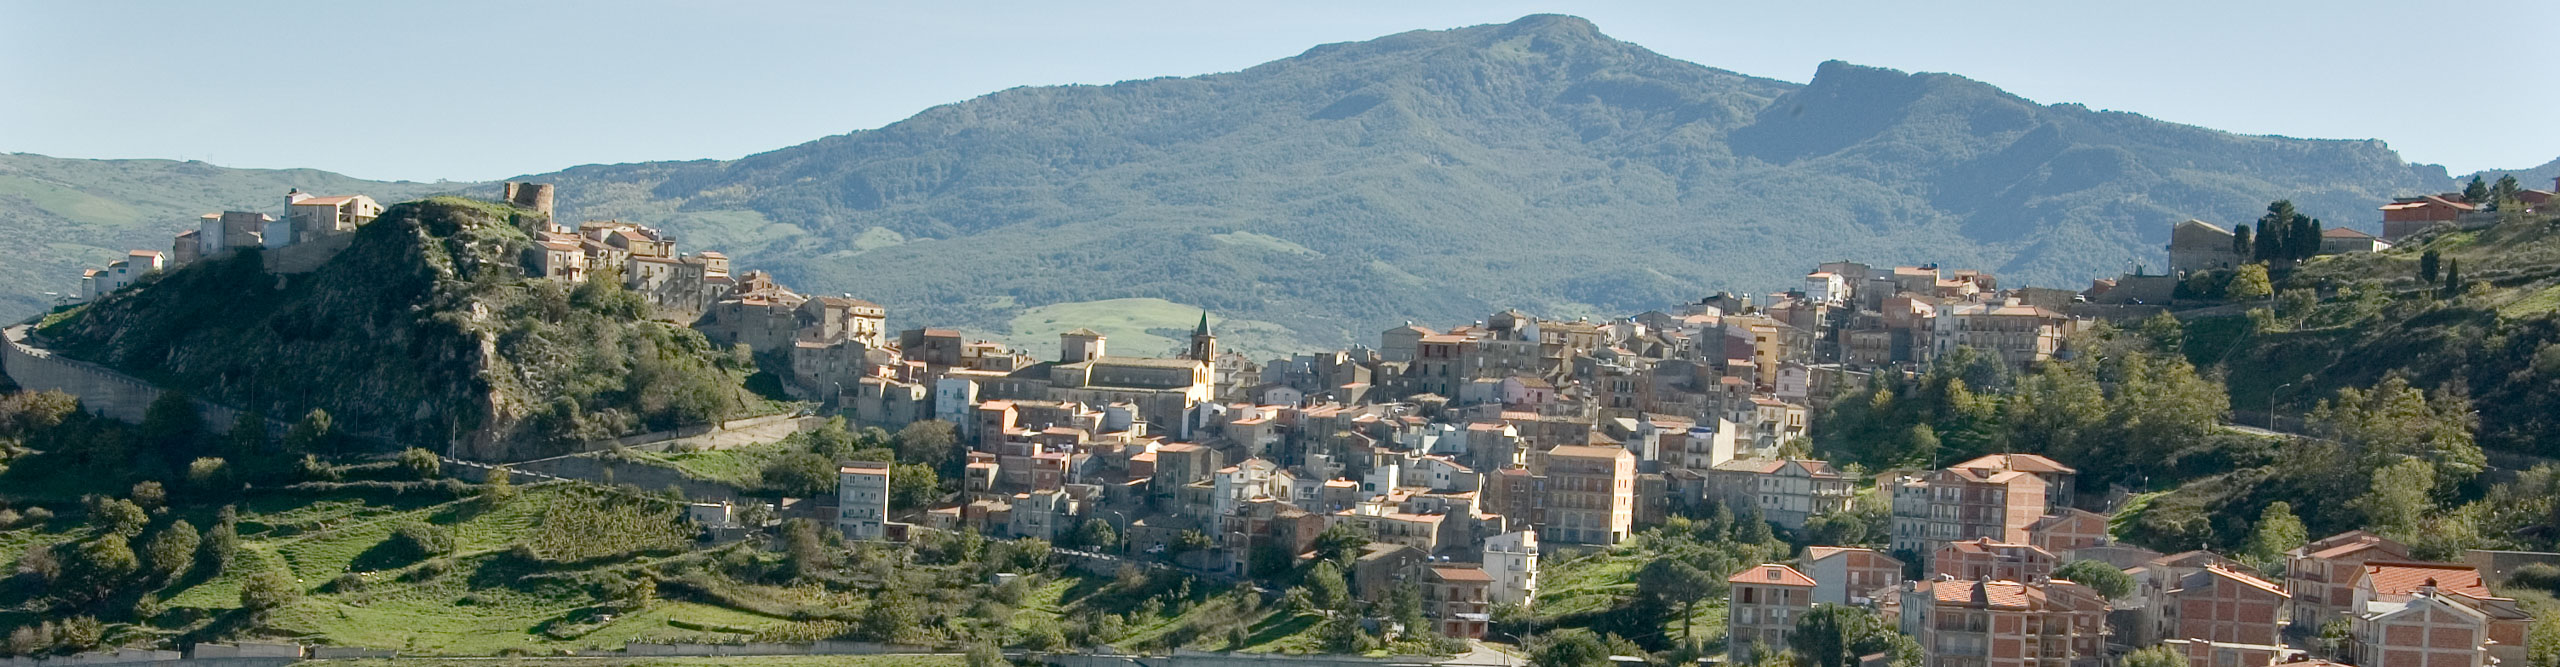 Aerial view of town in Sicily in the late afternoon, Italy 